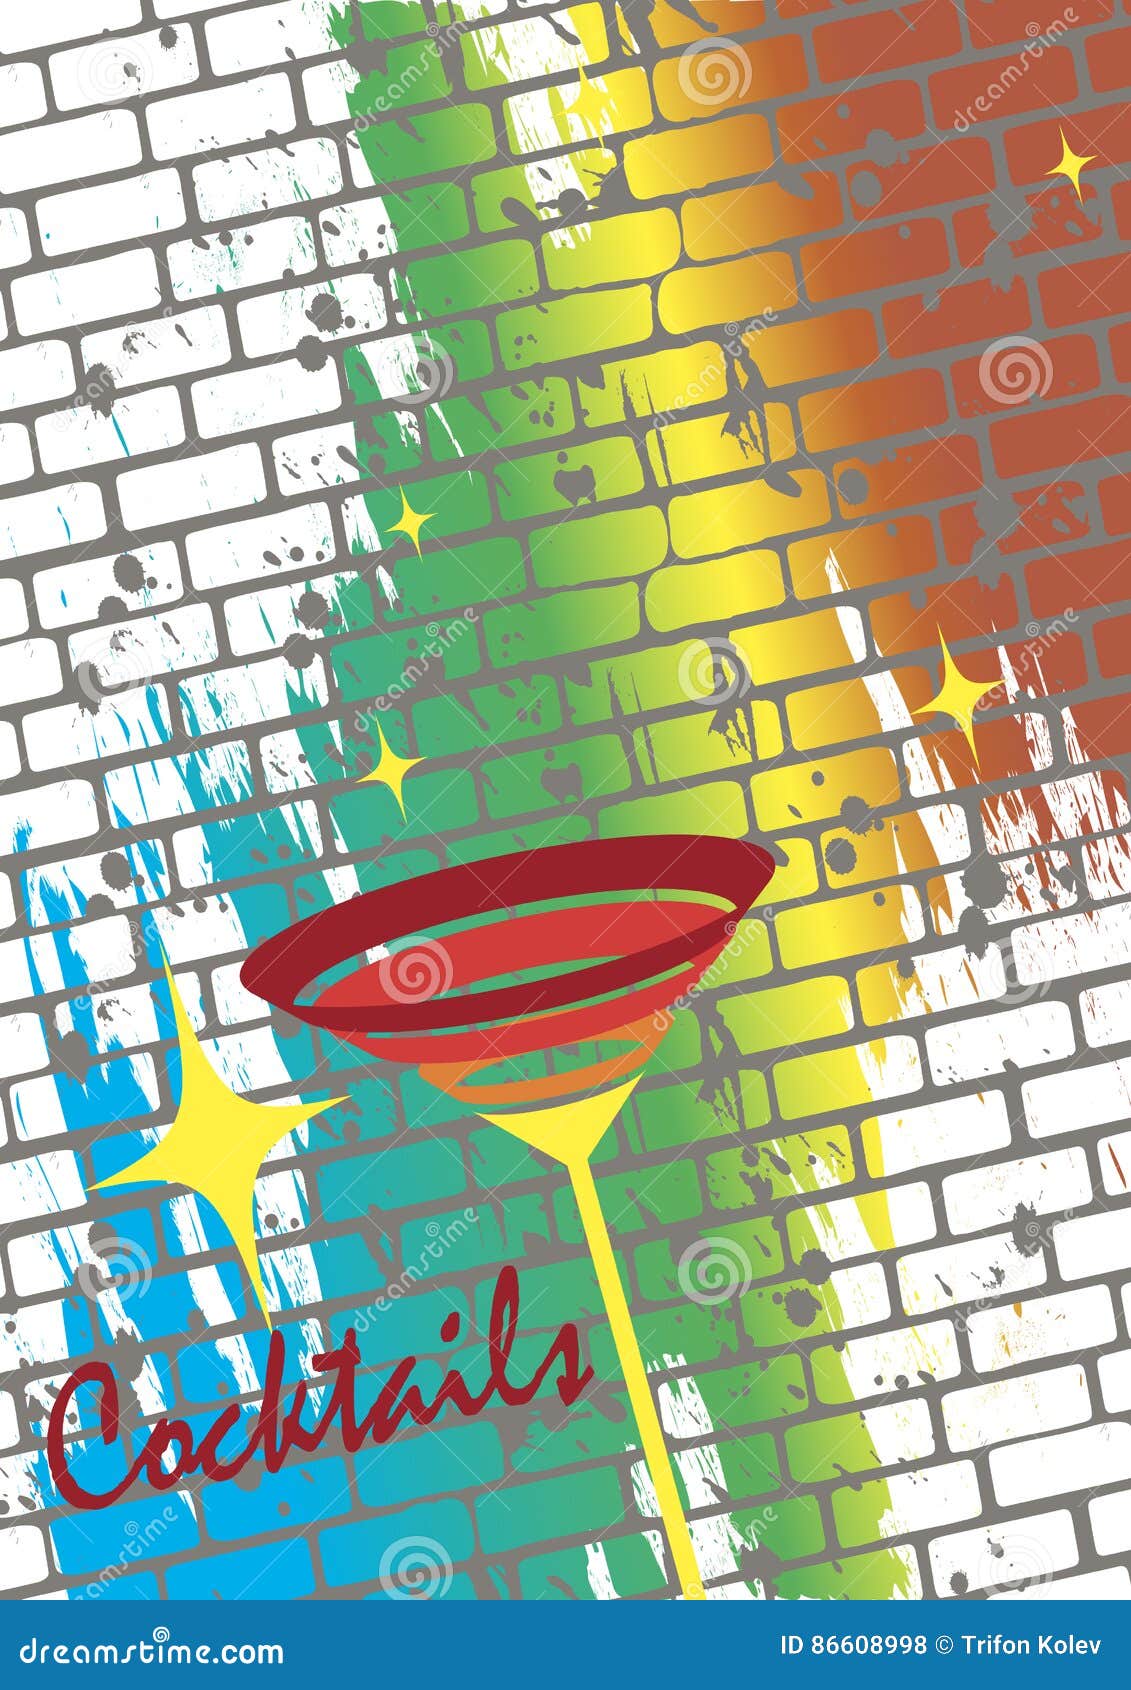 Retro Cocktail Party Poster Background Wallpaper Image For Free